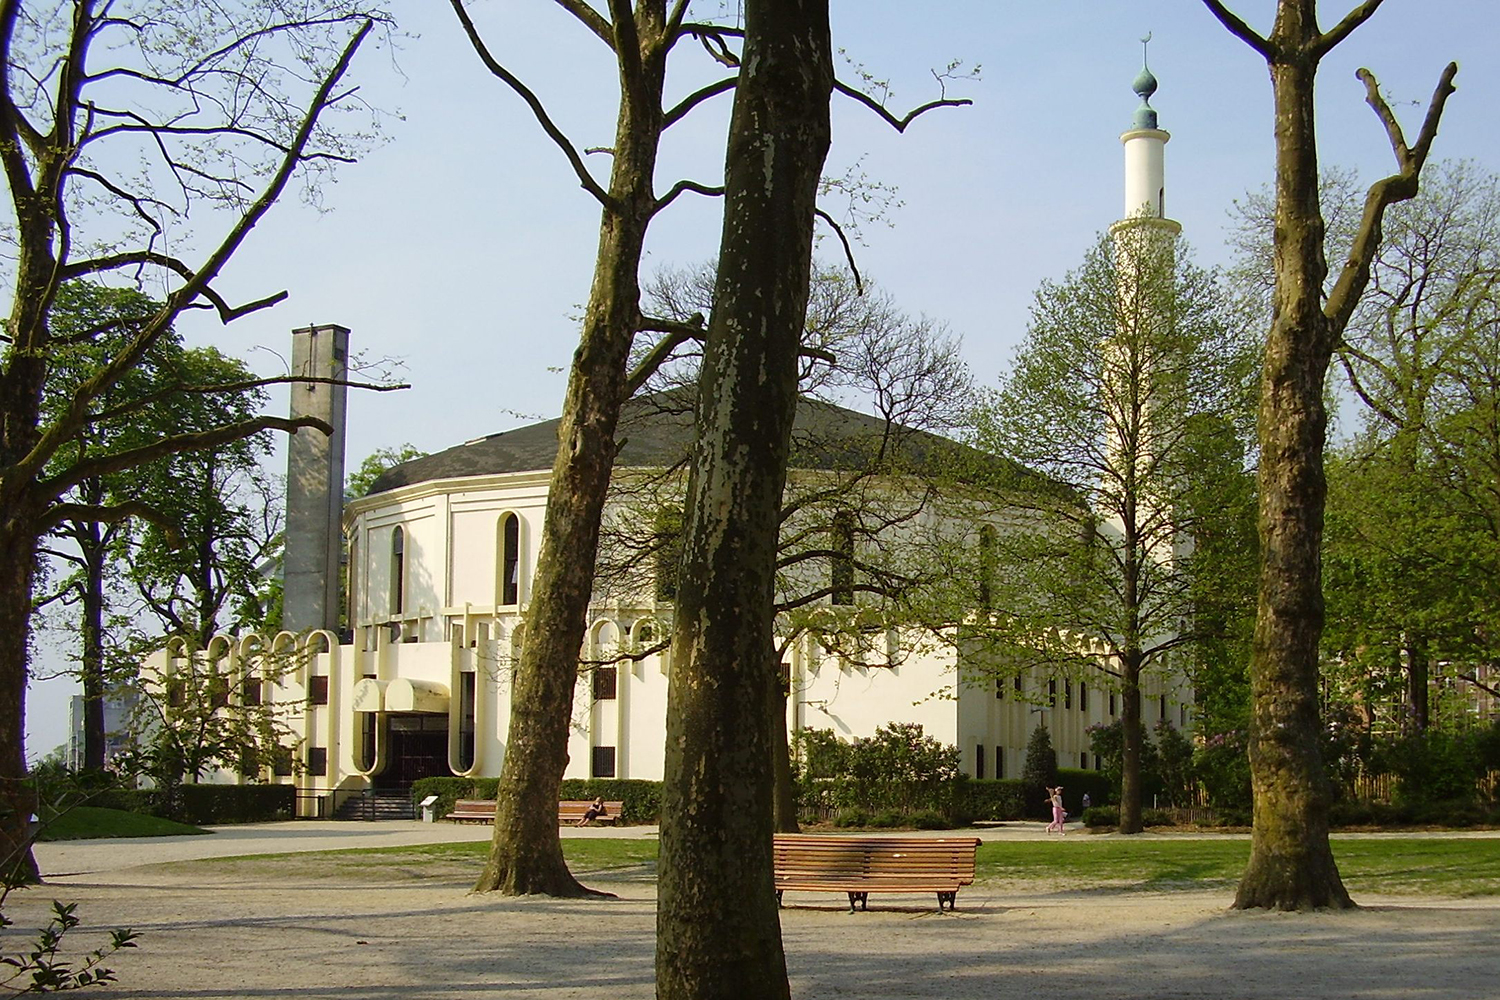 The Salafist stronghold of Brussels